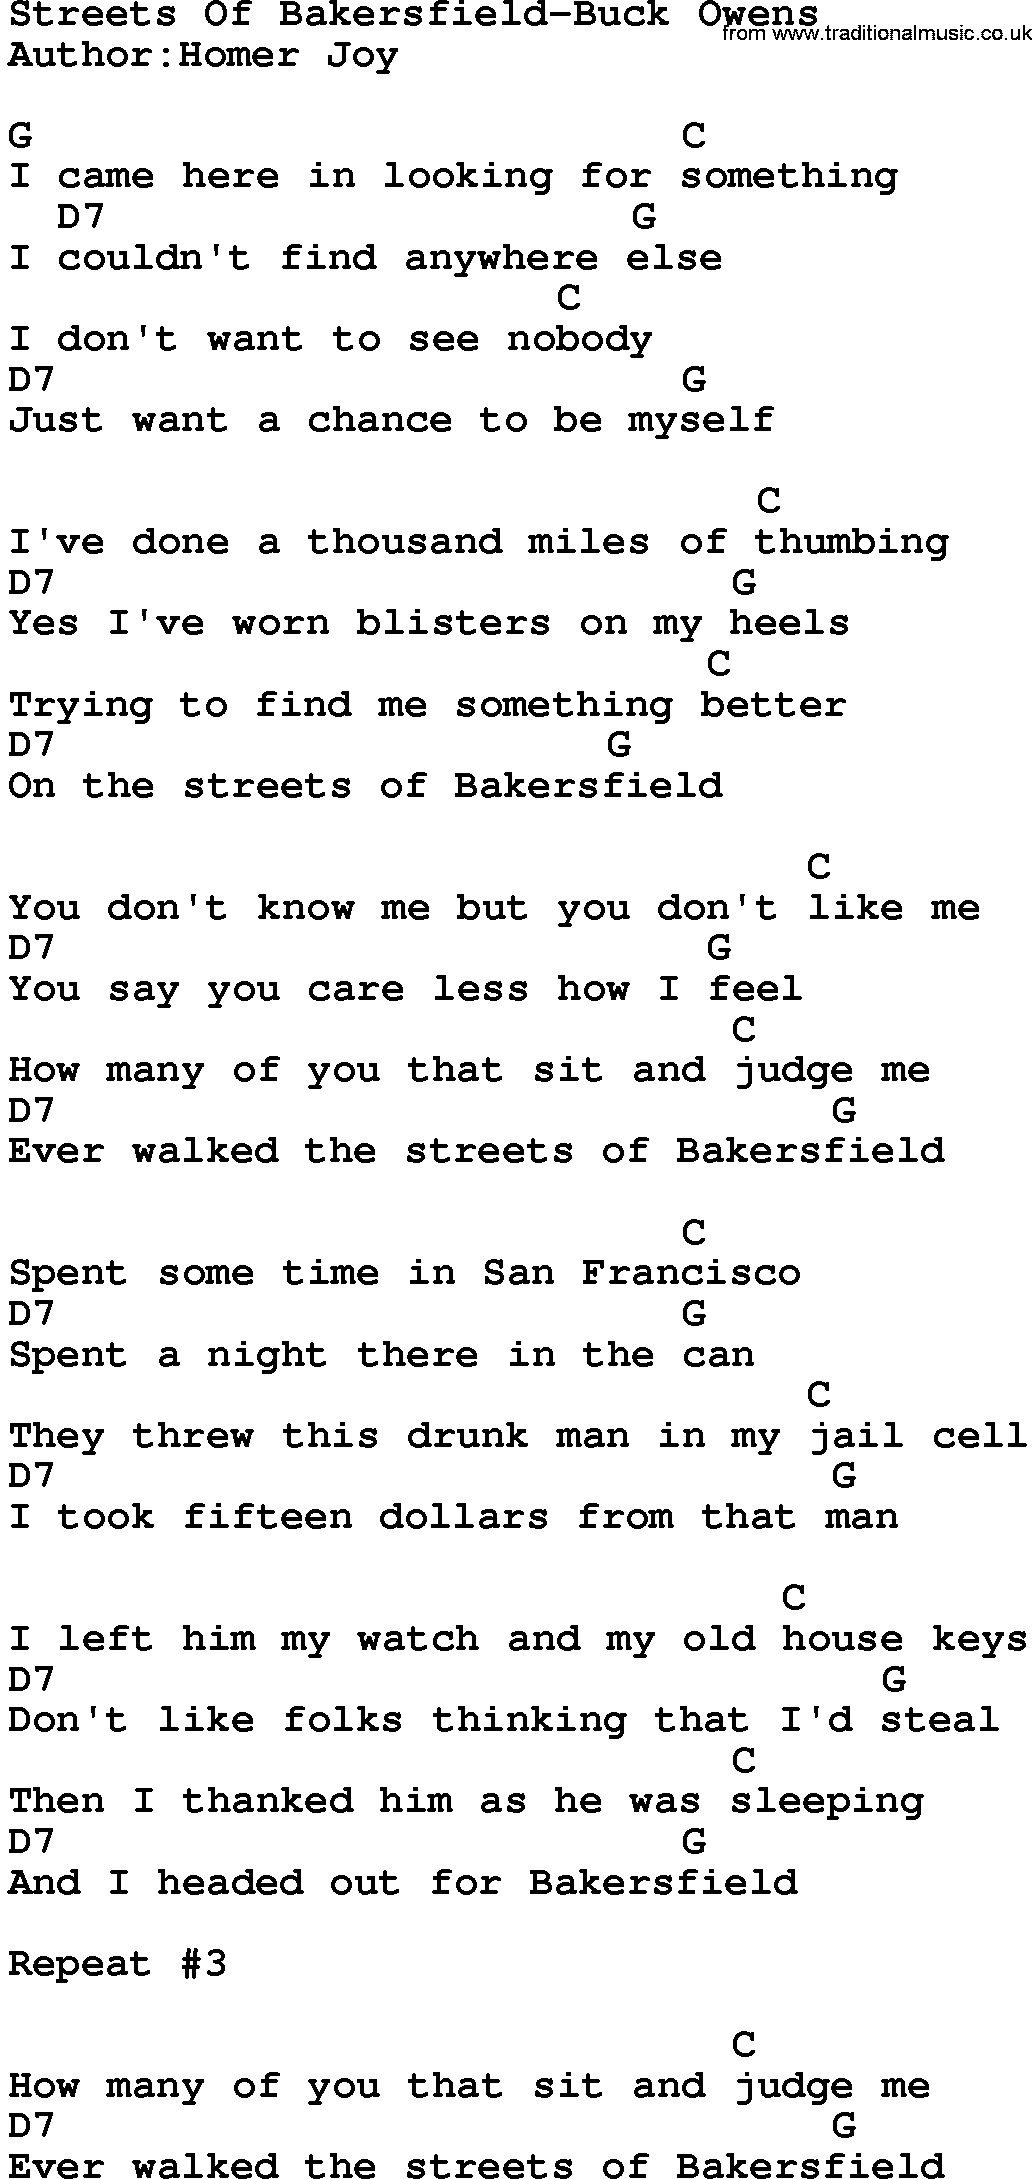 Country music song: Streets Of Bakersfield-Buck Owens lyrics and chords